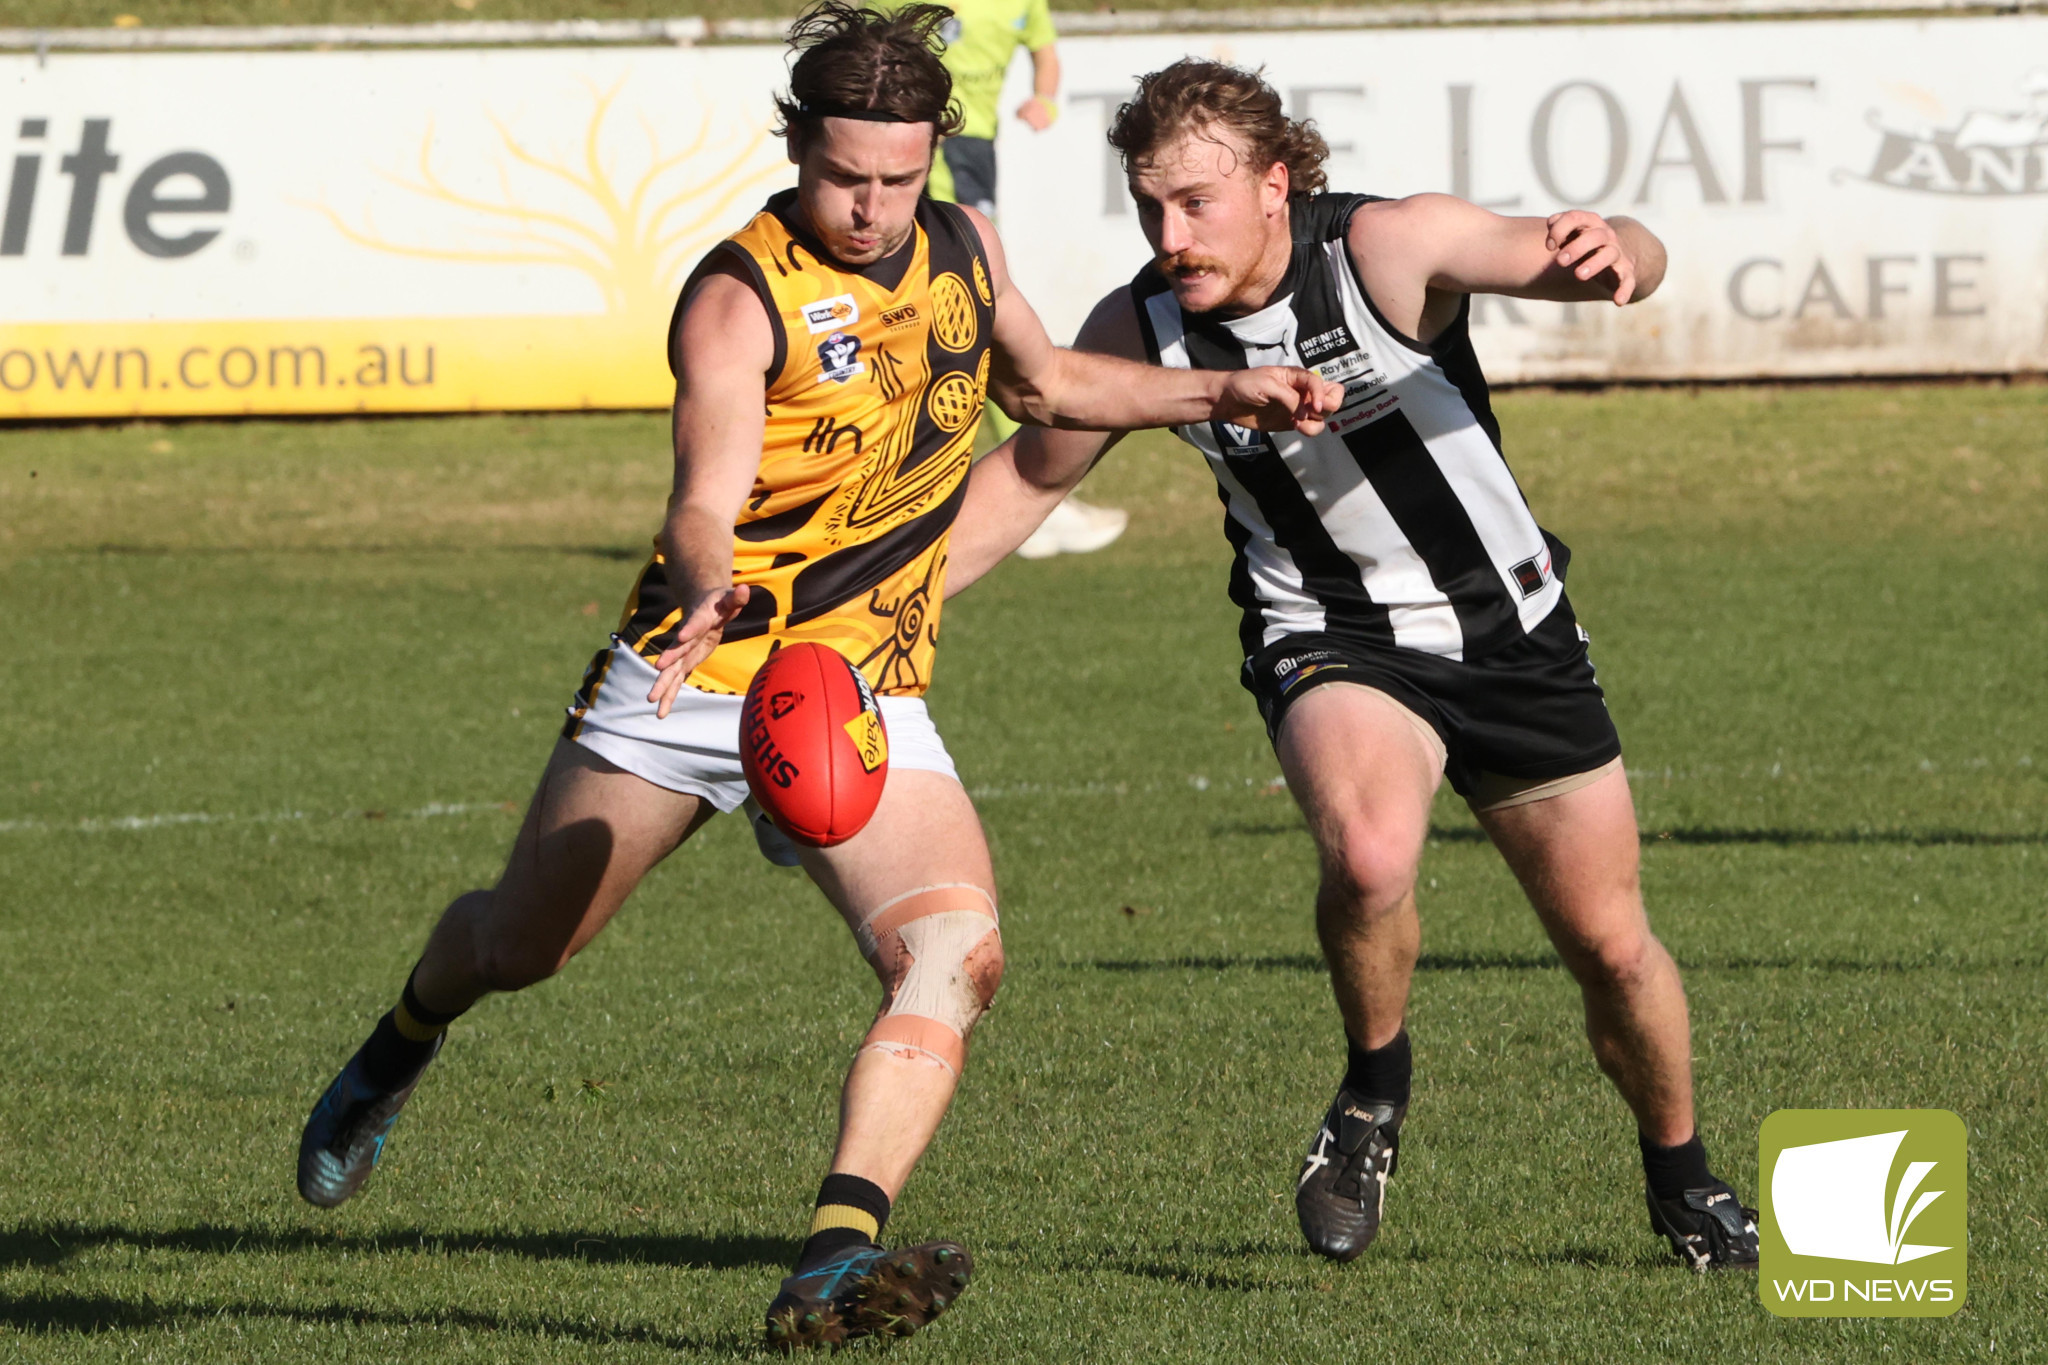 Third win for Pies - feature photo